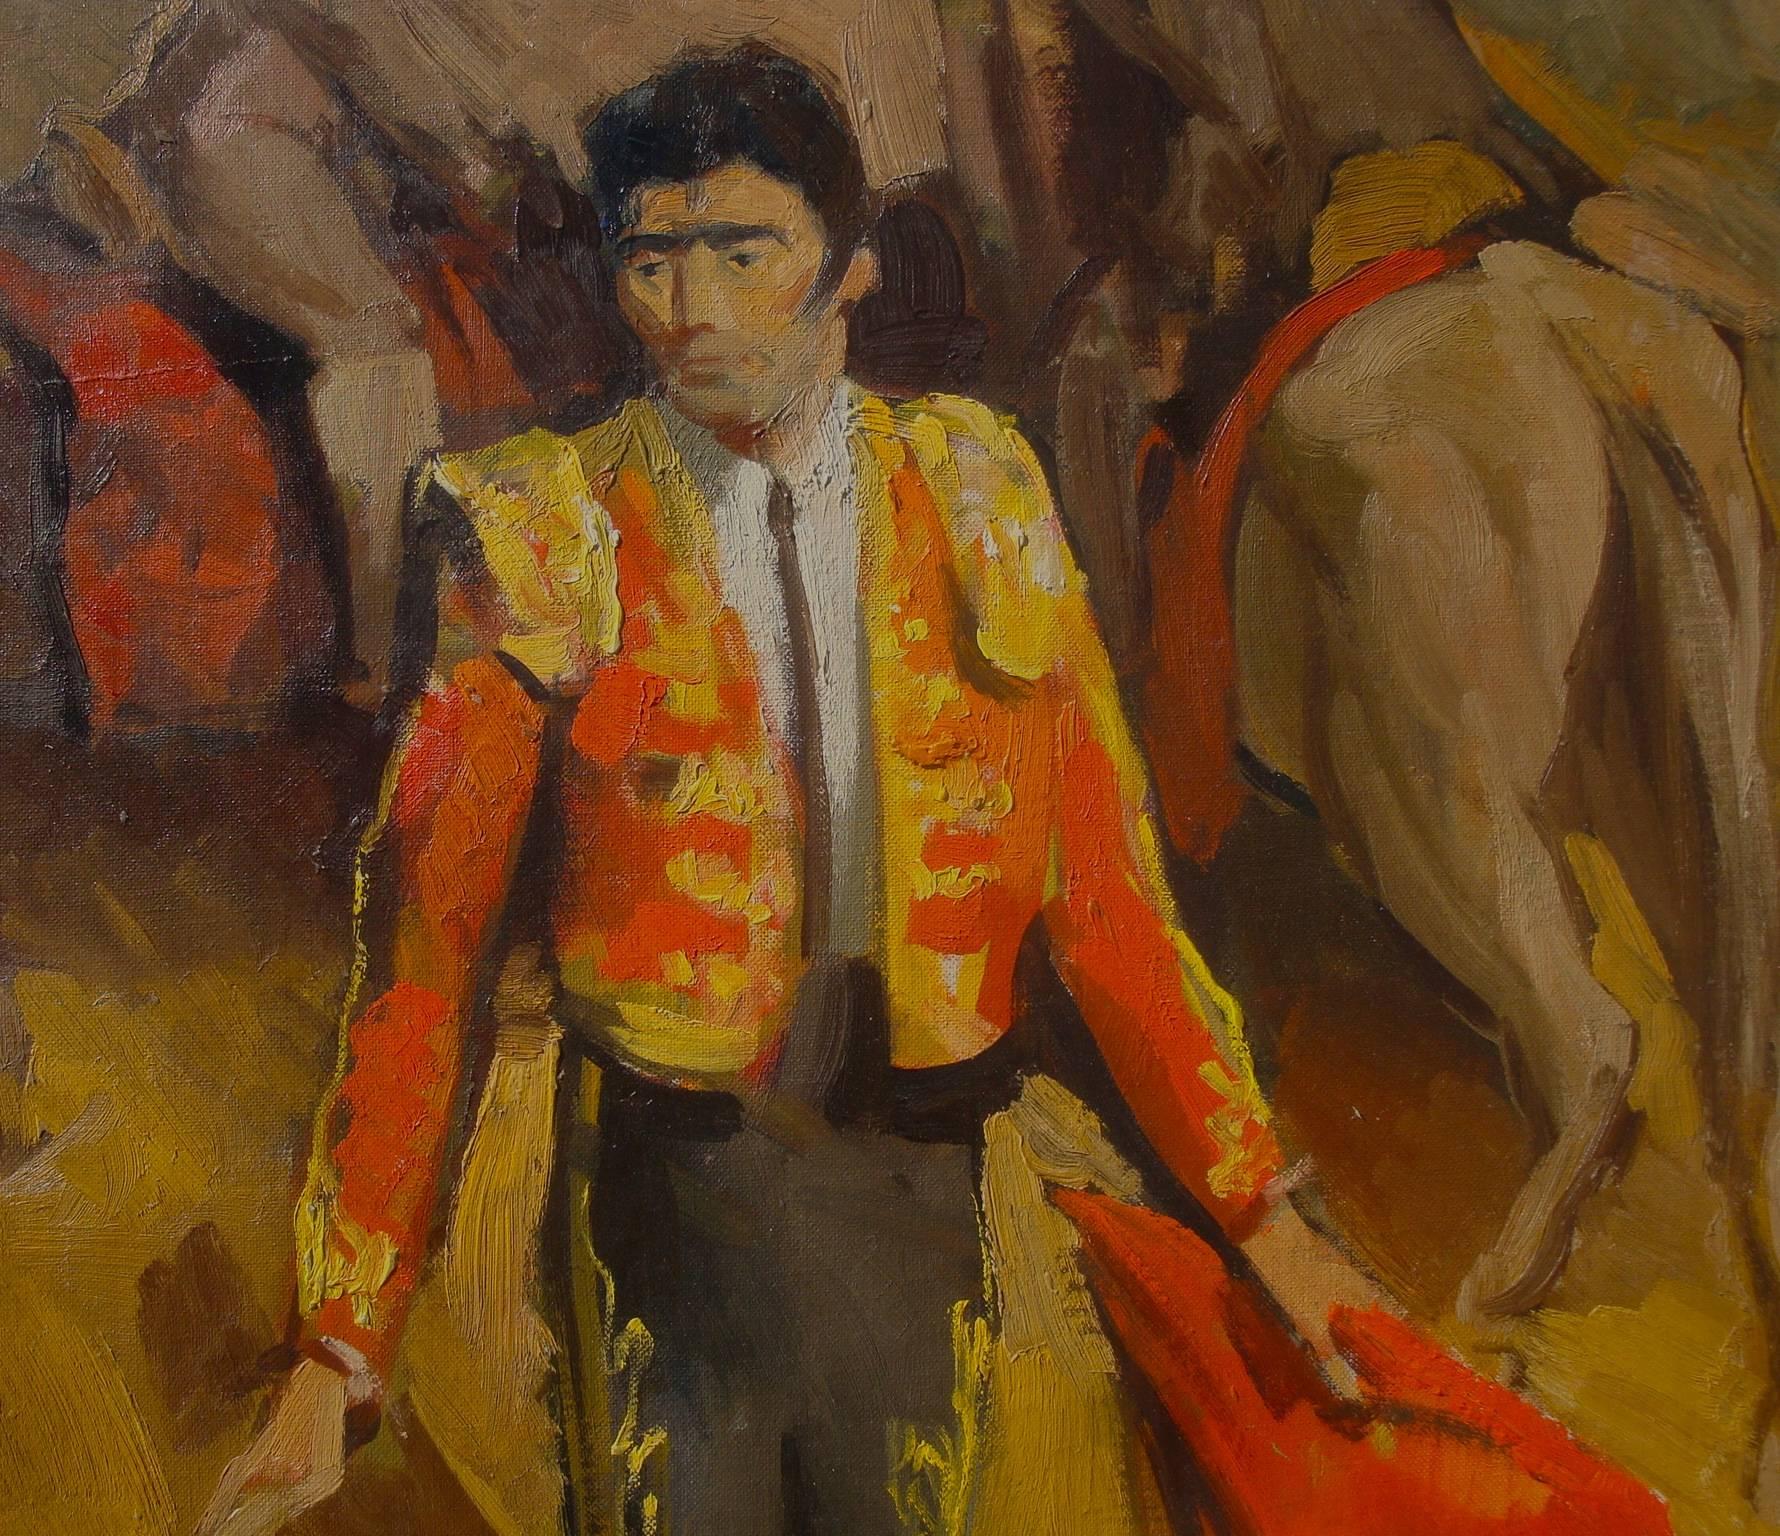 Offered is an oil on board portrait of a Spanish matador in the ring, by New York artists Edmund Franklin Ward (1892-1990). Ward studied at the Art Students League and enjoyed a prolific career as a painter, as well as being a leading illustrator